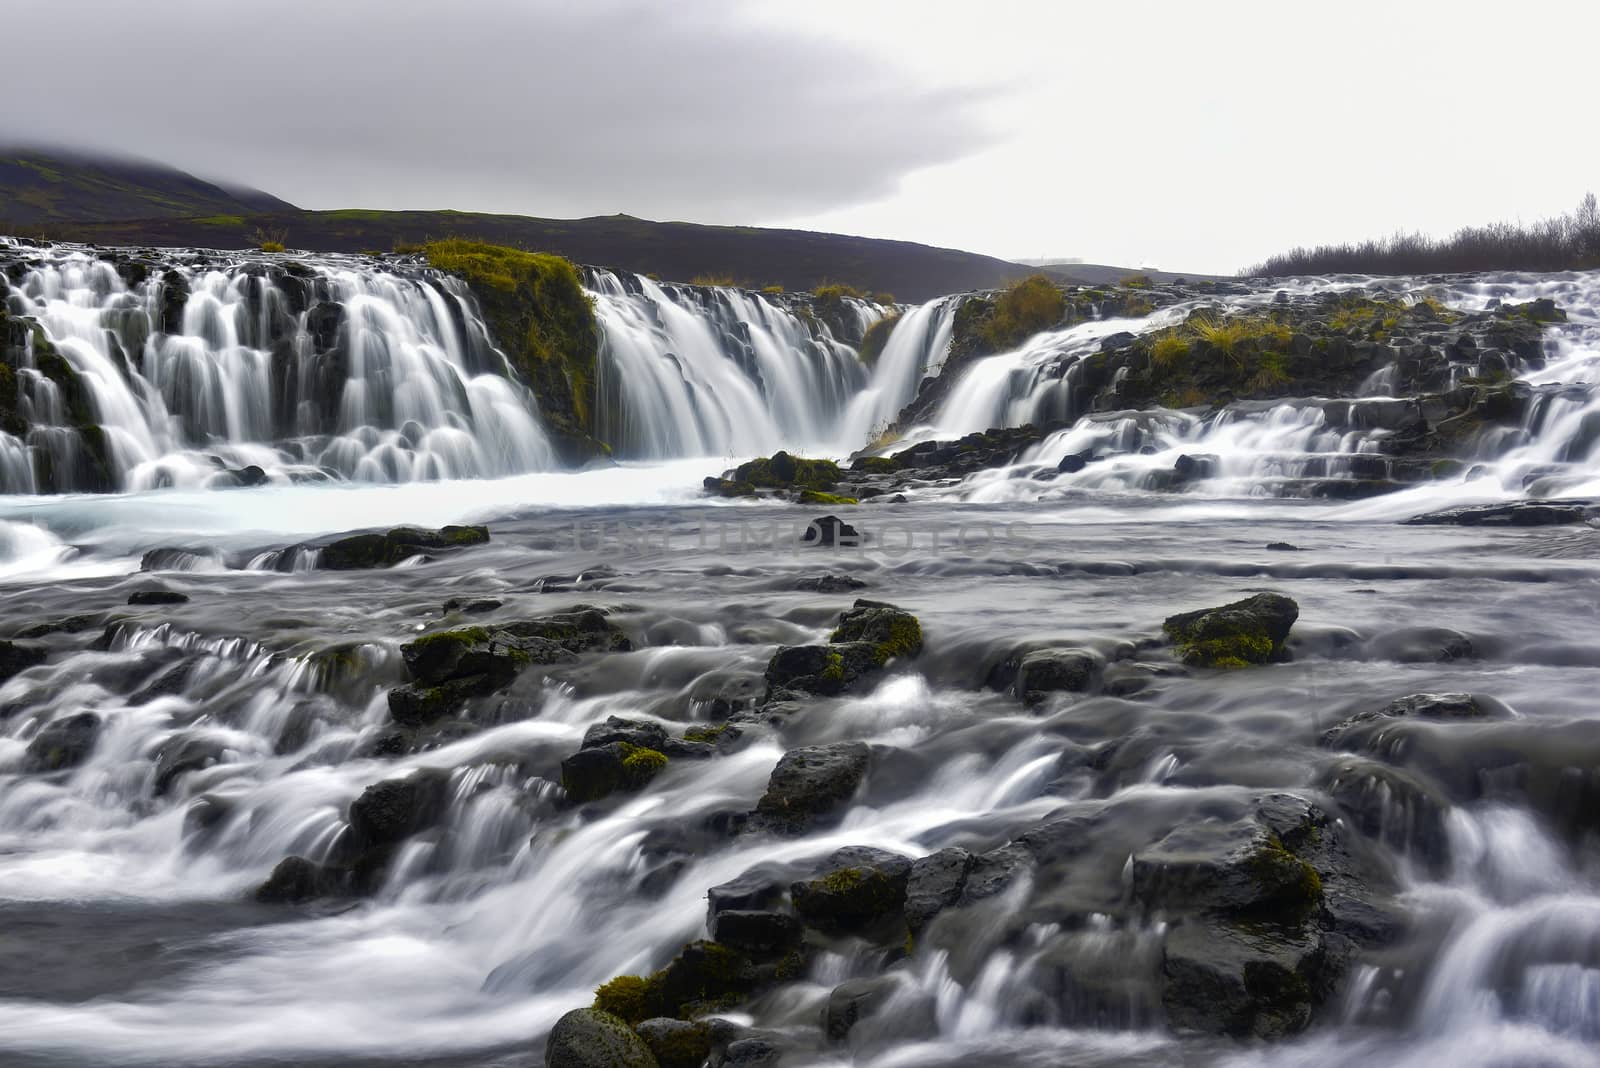 Bruarfoss (Bridge Fall), is a waterfall on the river Bruara, in by udompeter